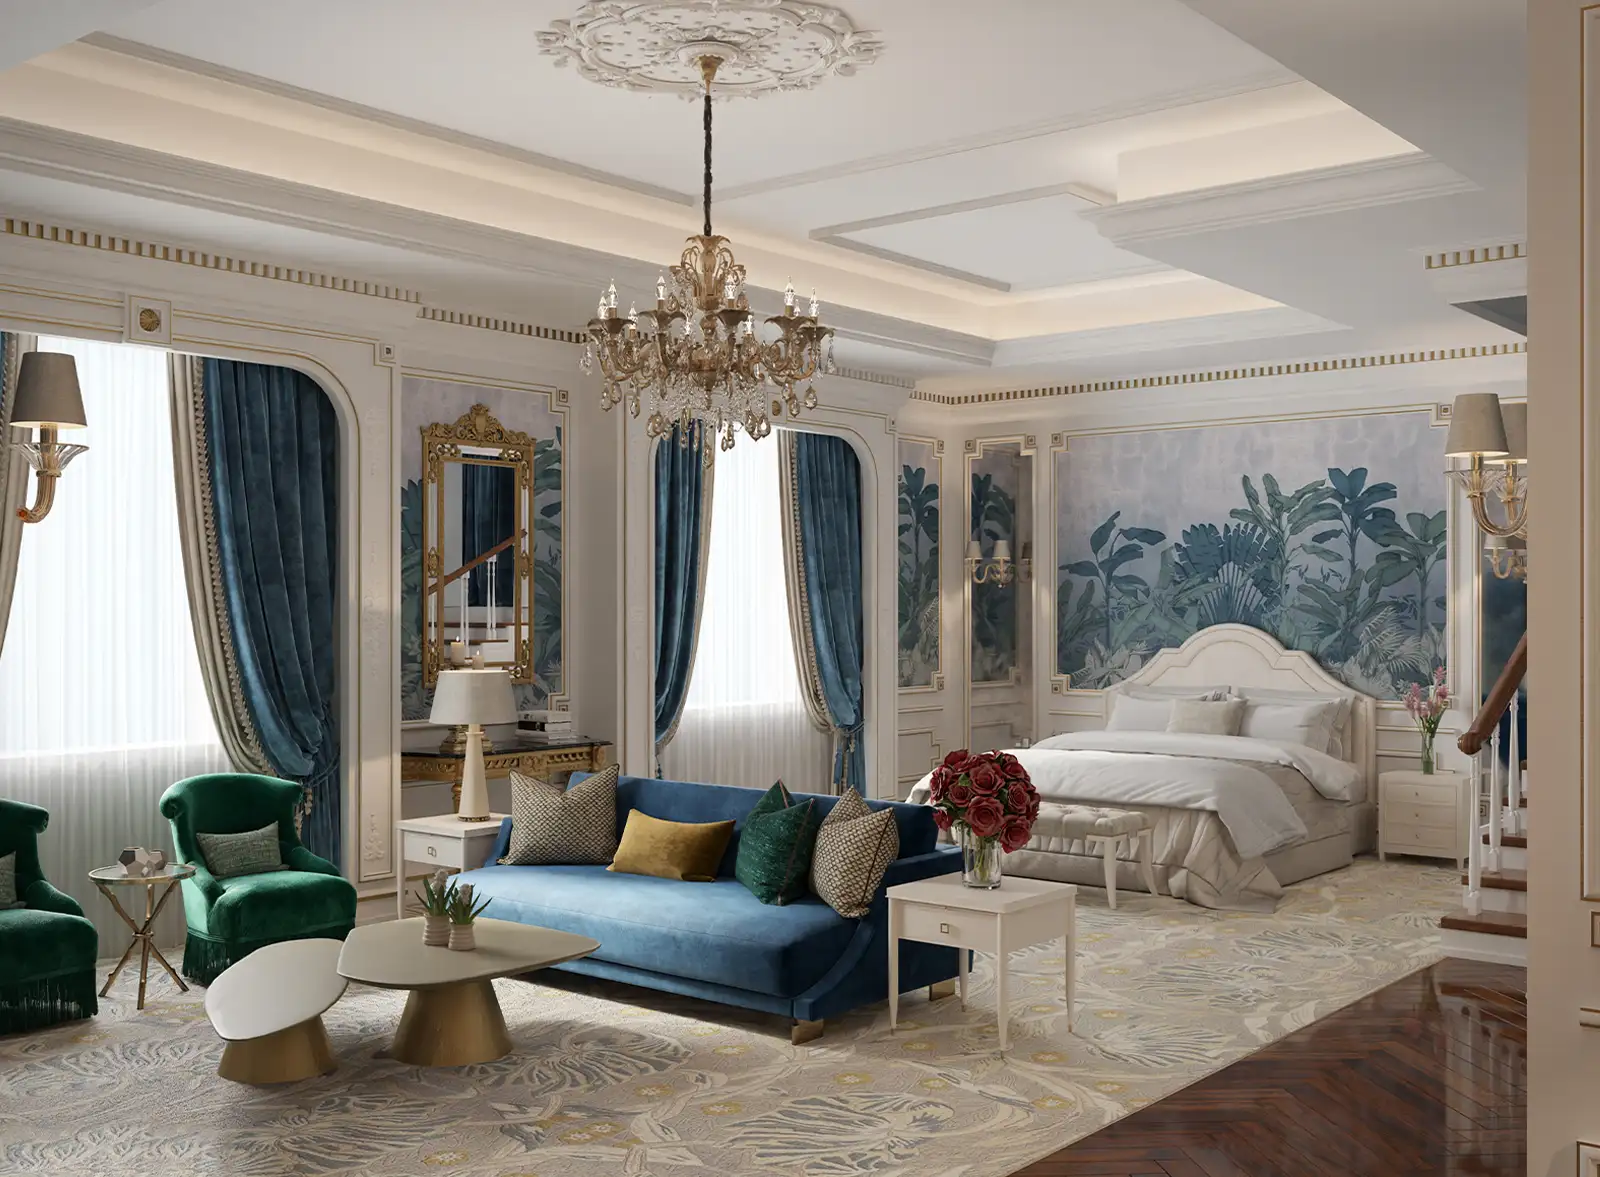 Luxury bedroom and lounge area interior design with a plush blue velvet sofa, elegant green armchairs, gold coffee tables, a classic white bed, and tropical mural wallpaper, under a grand crystal chandelier and detailed ceiling architecture